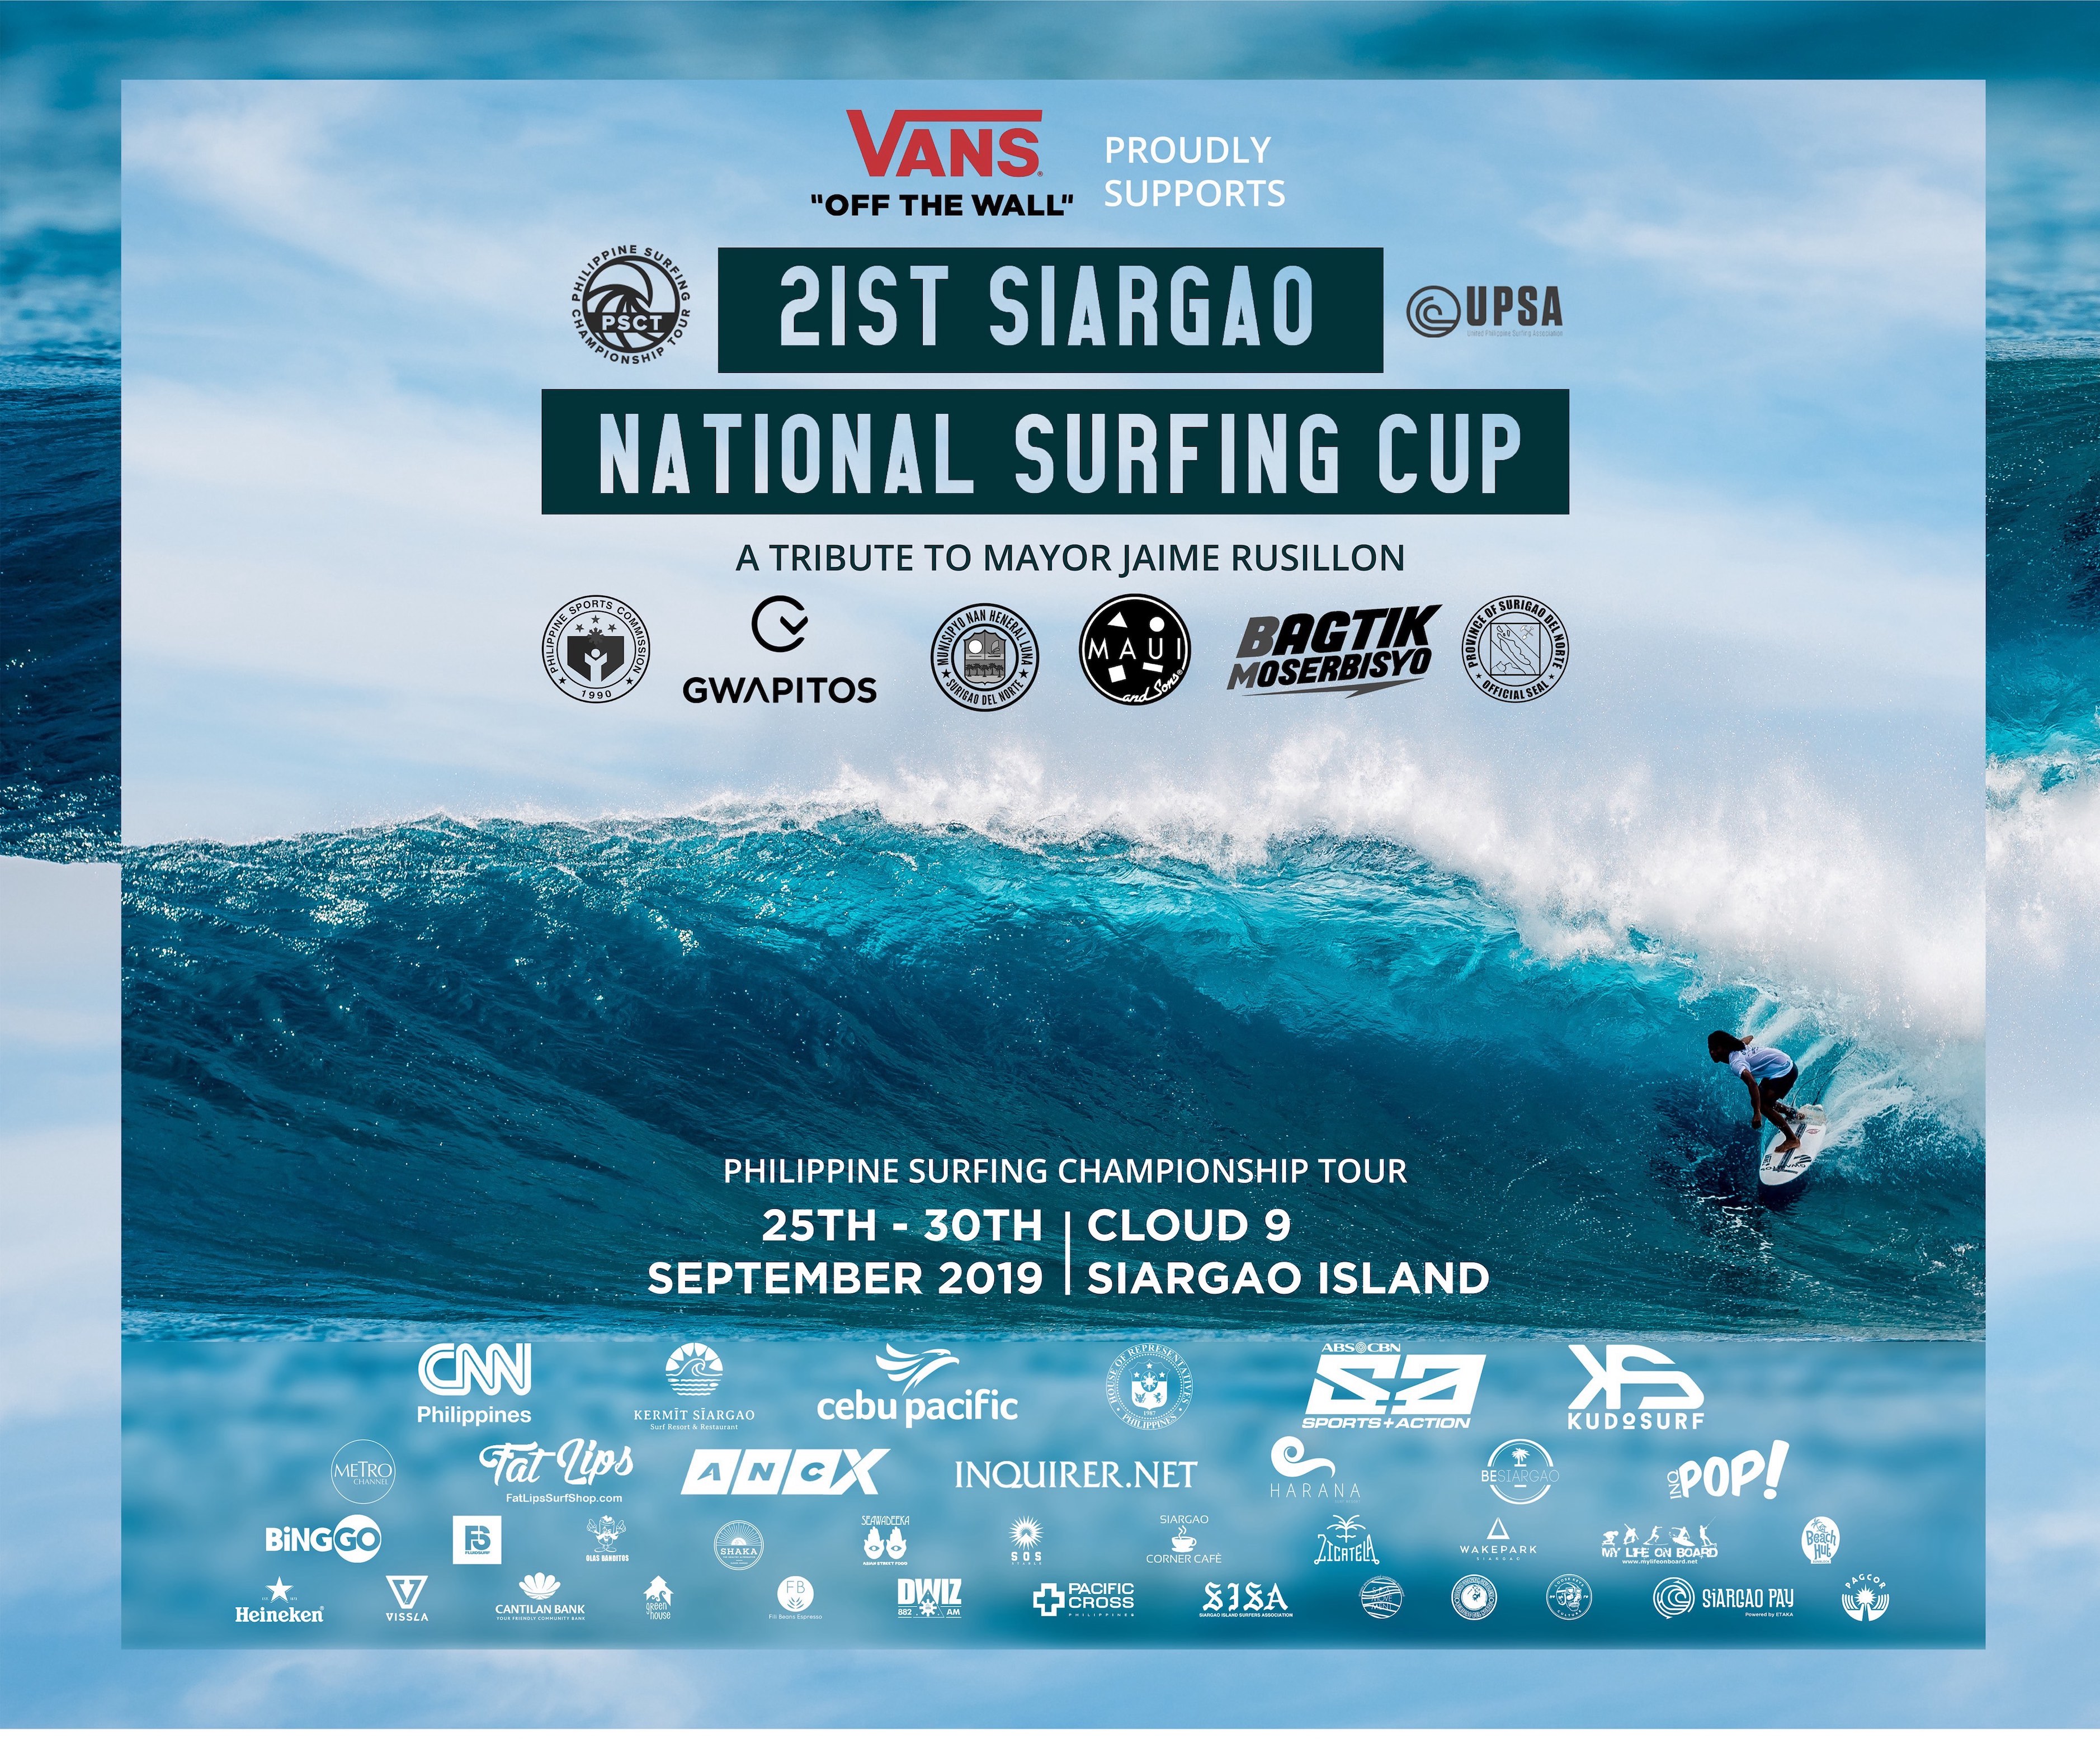 The 21st Siargao National Surfing Cup is Here